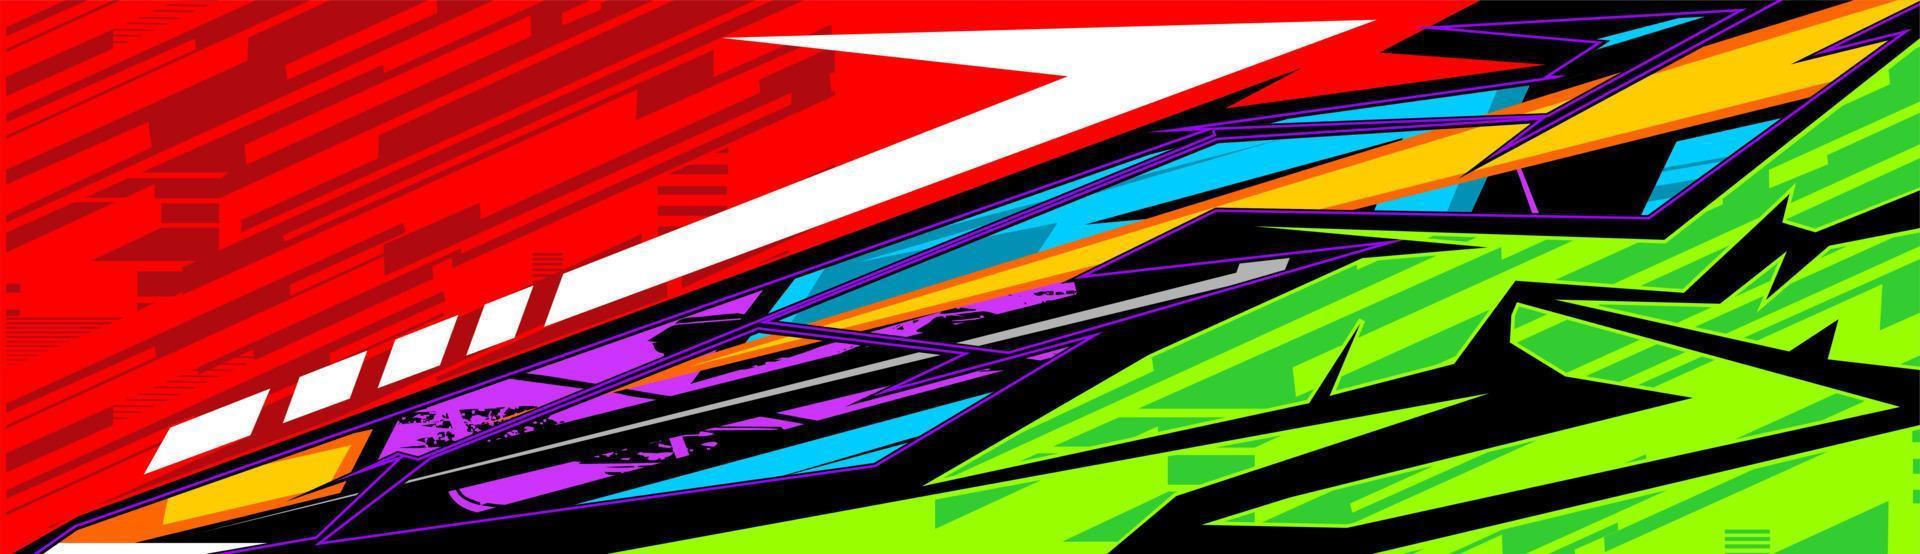 Car decal design vector. Graphic abstract stripe racing background kit designs for wrap vehicle, race car, rally, adventure and livery vector